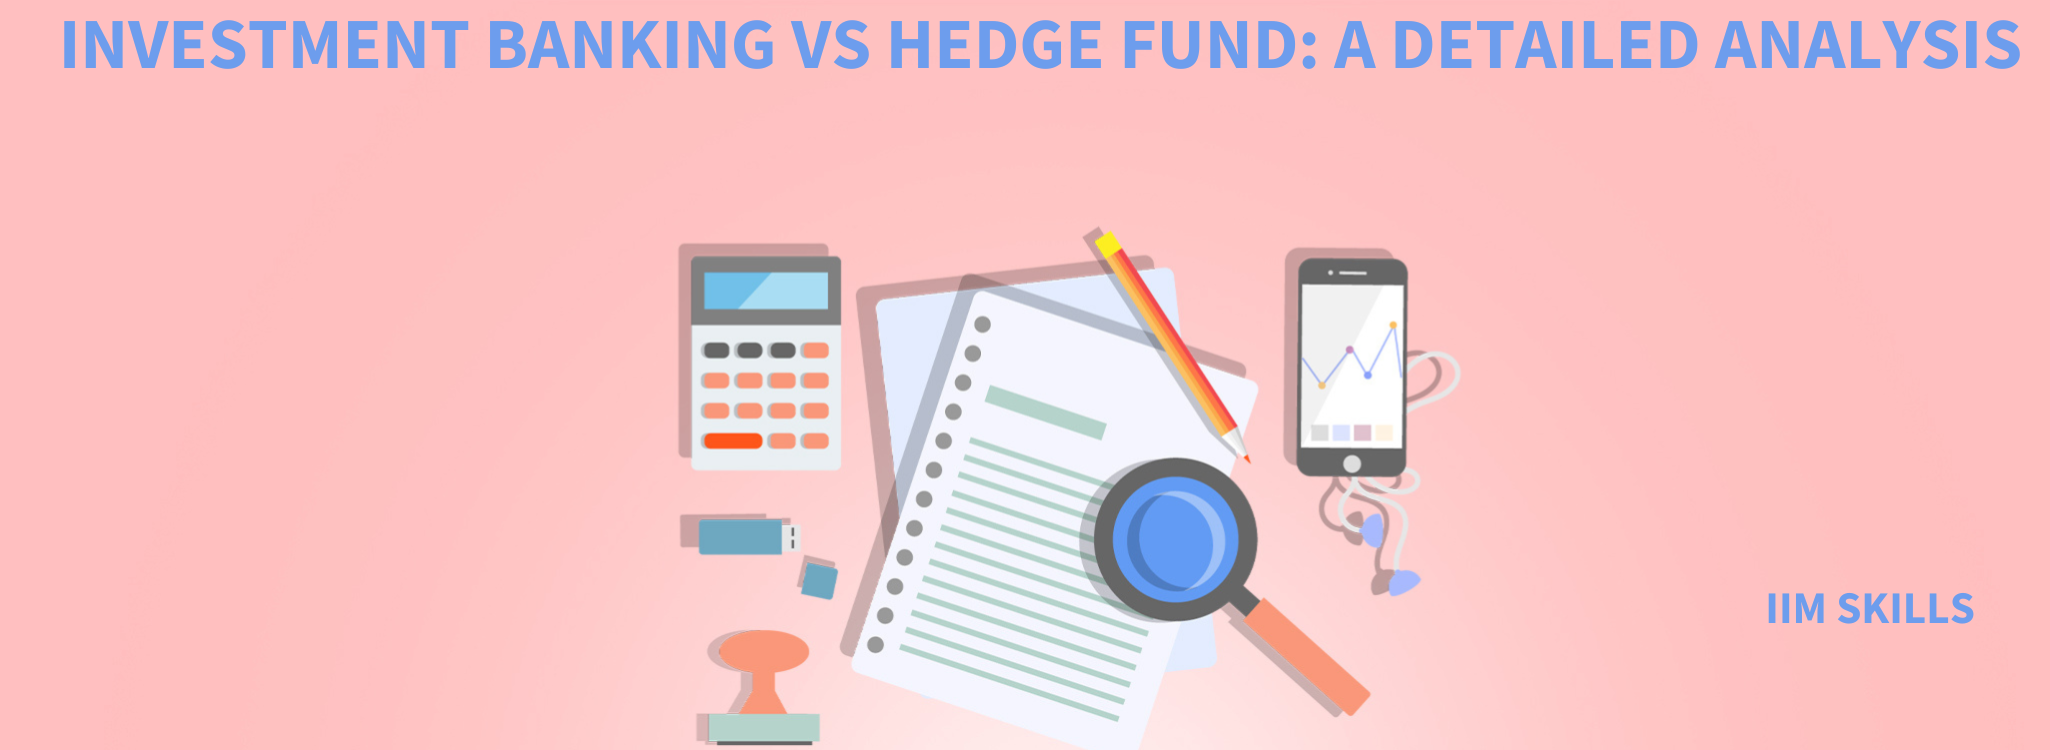 INVESTMENT BANKING VS HEDGE FUND A DETAILED ANALYSIS